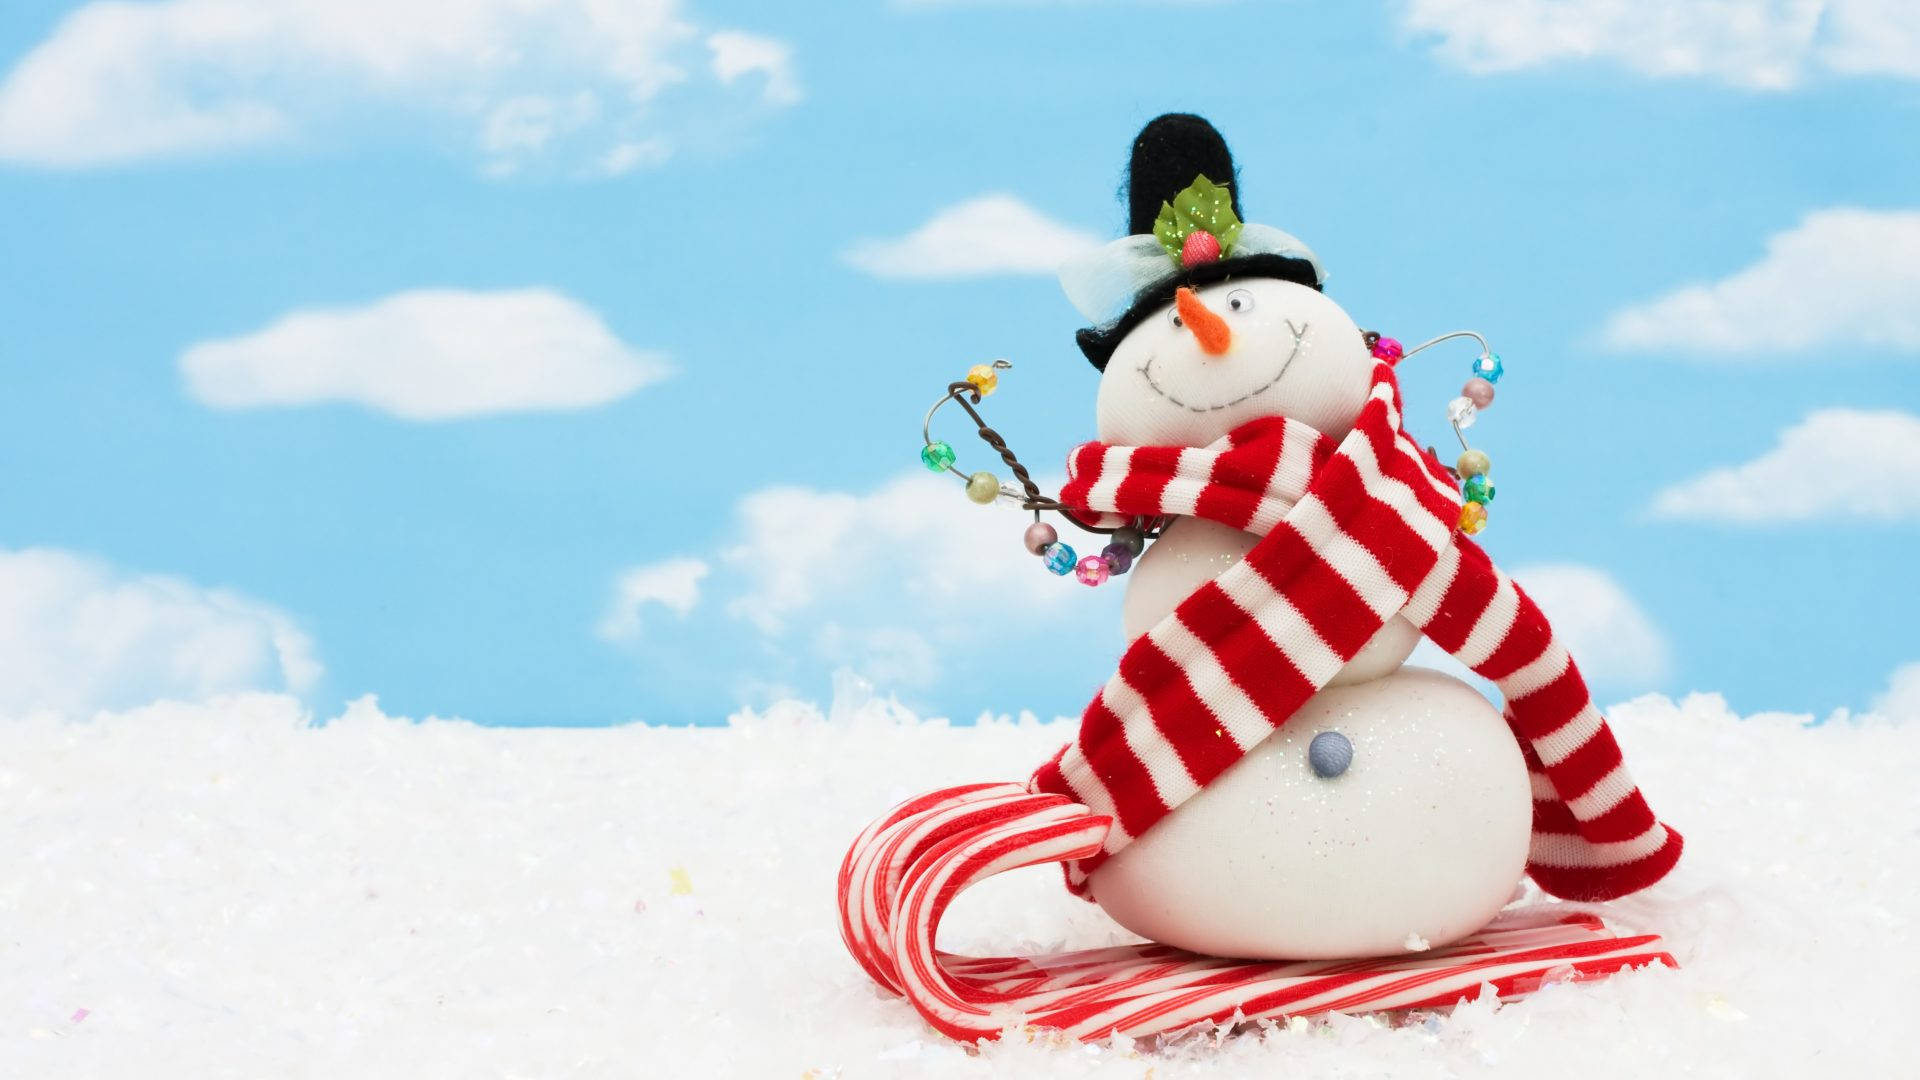 A cozy winter day with a cute snowman! Wallpaper